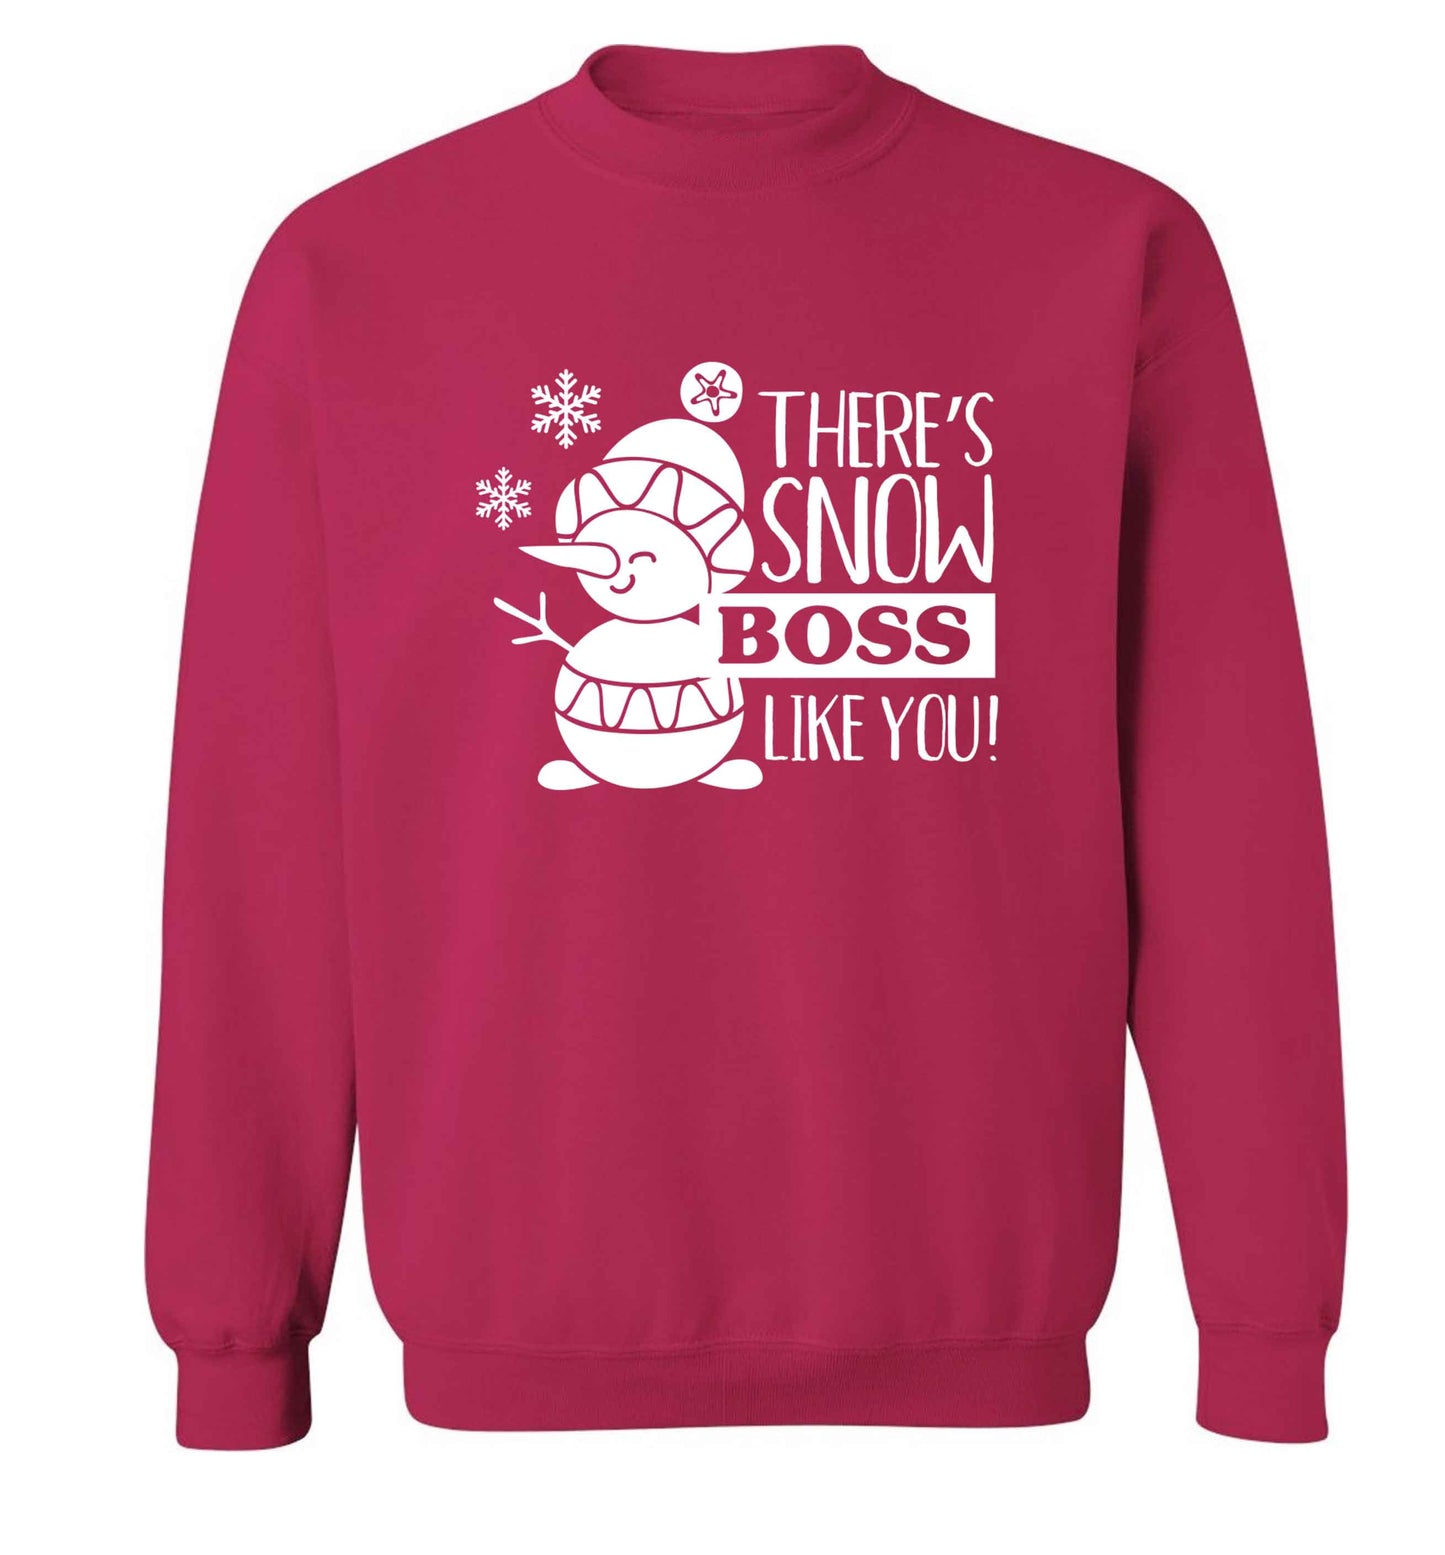 There's snow boss like you adult's unisex pink sweater 2XL